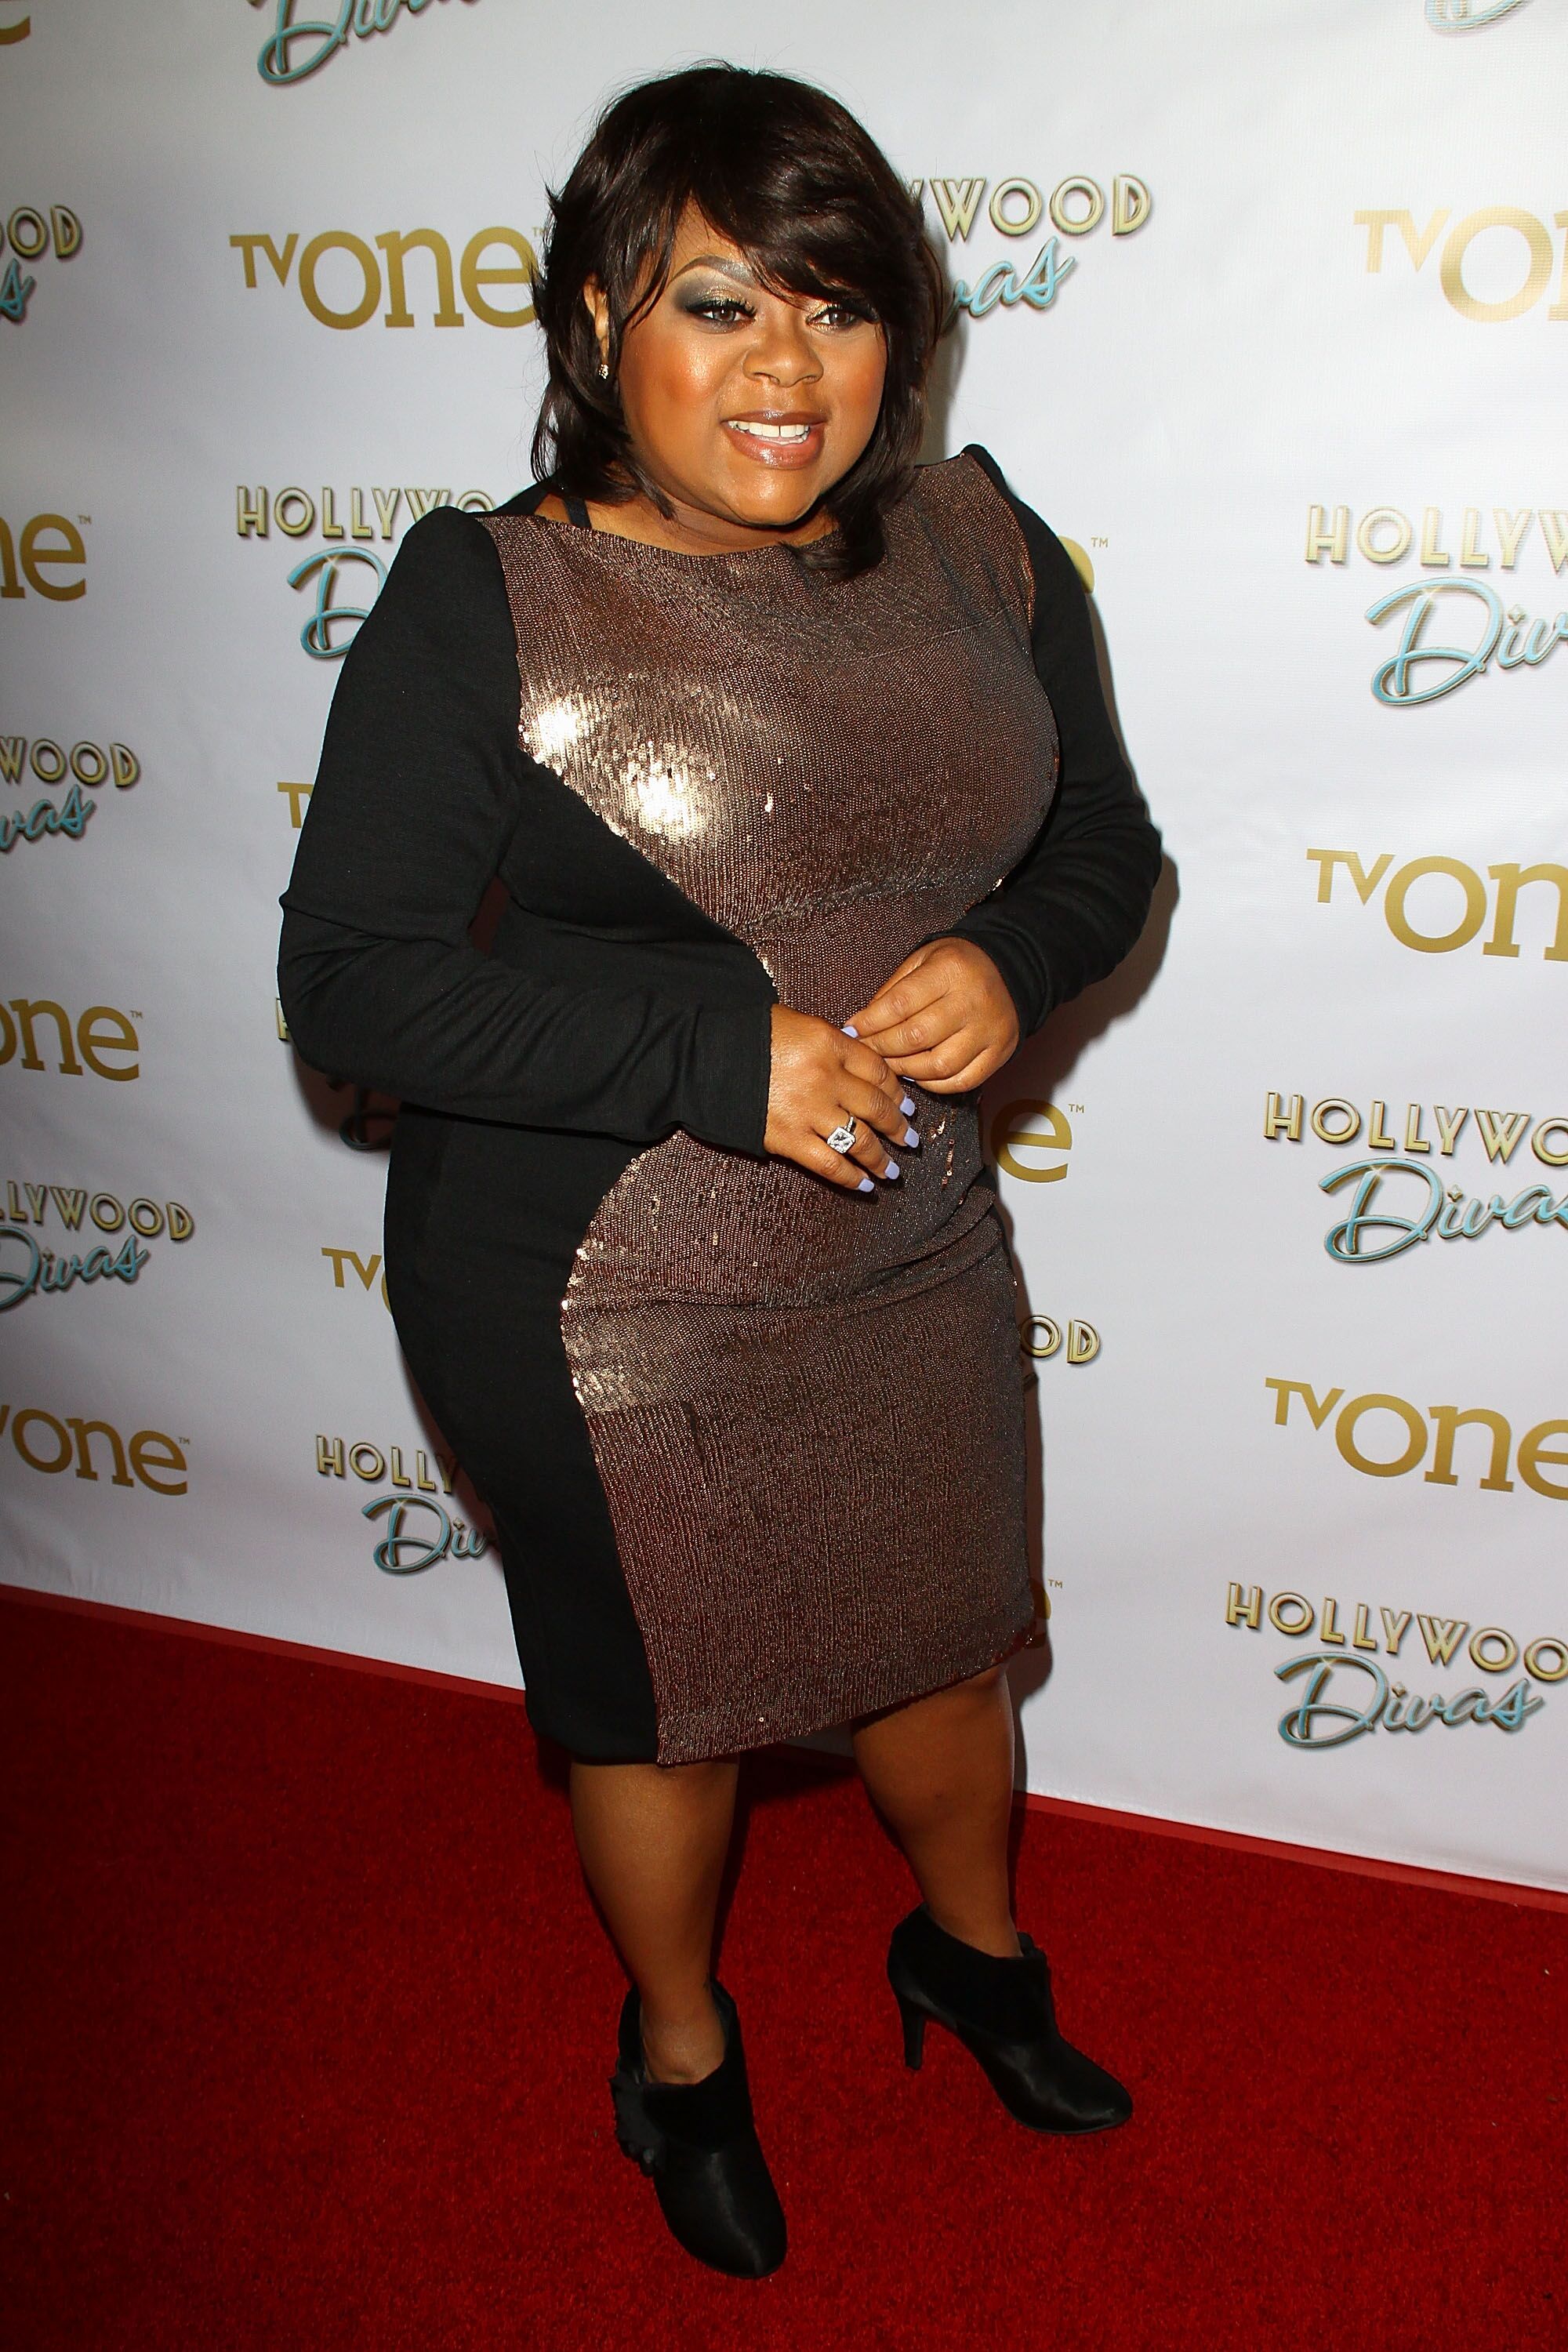 Countess Vaughn attends the premiere party for TV One's "Hollywood Divas" on October 7, 2014. | Photo: Getty Images